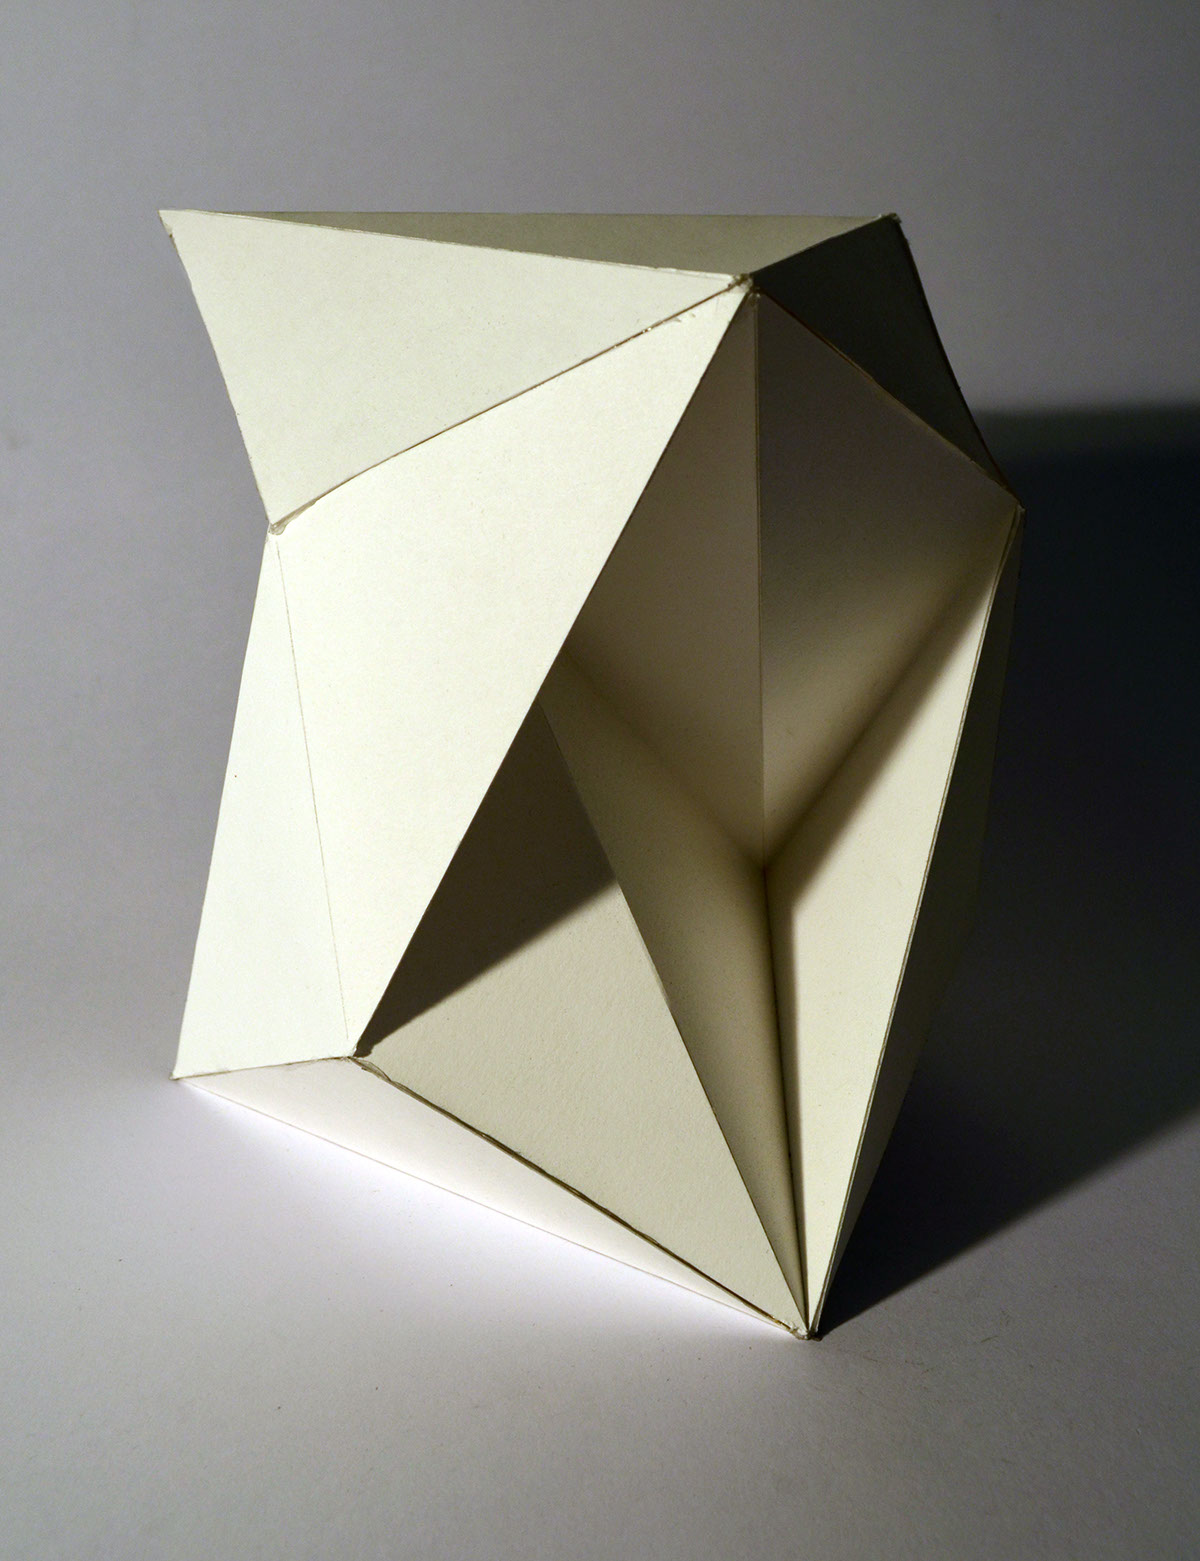 spatial abstract geometry geometric Dynamic architectural paper folding foundation studies Bristol origami  fractal space project Gareth Jones Time Project